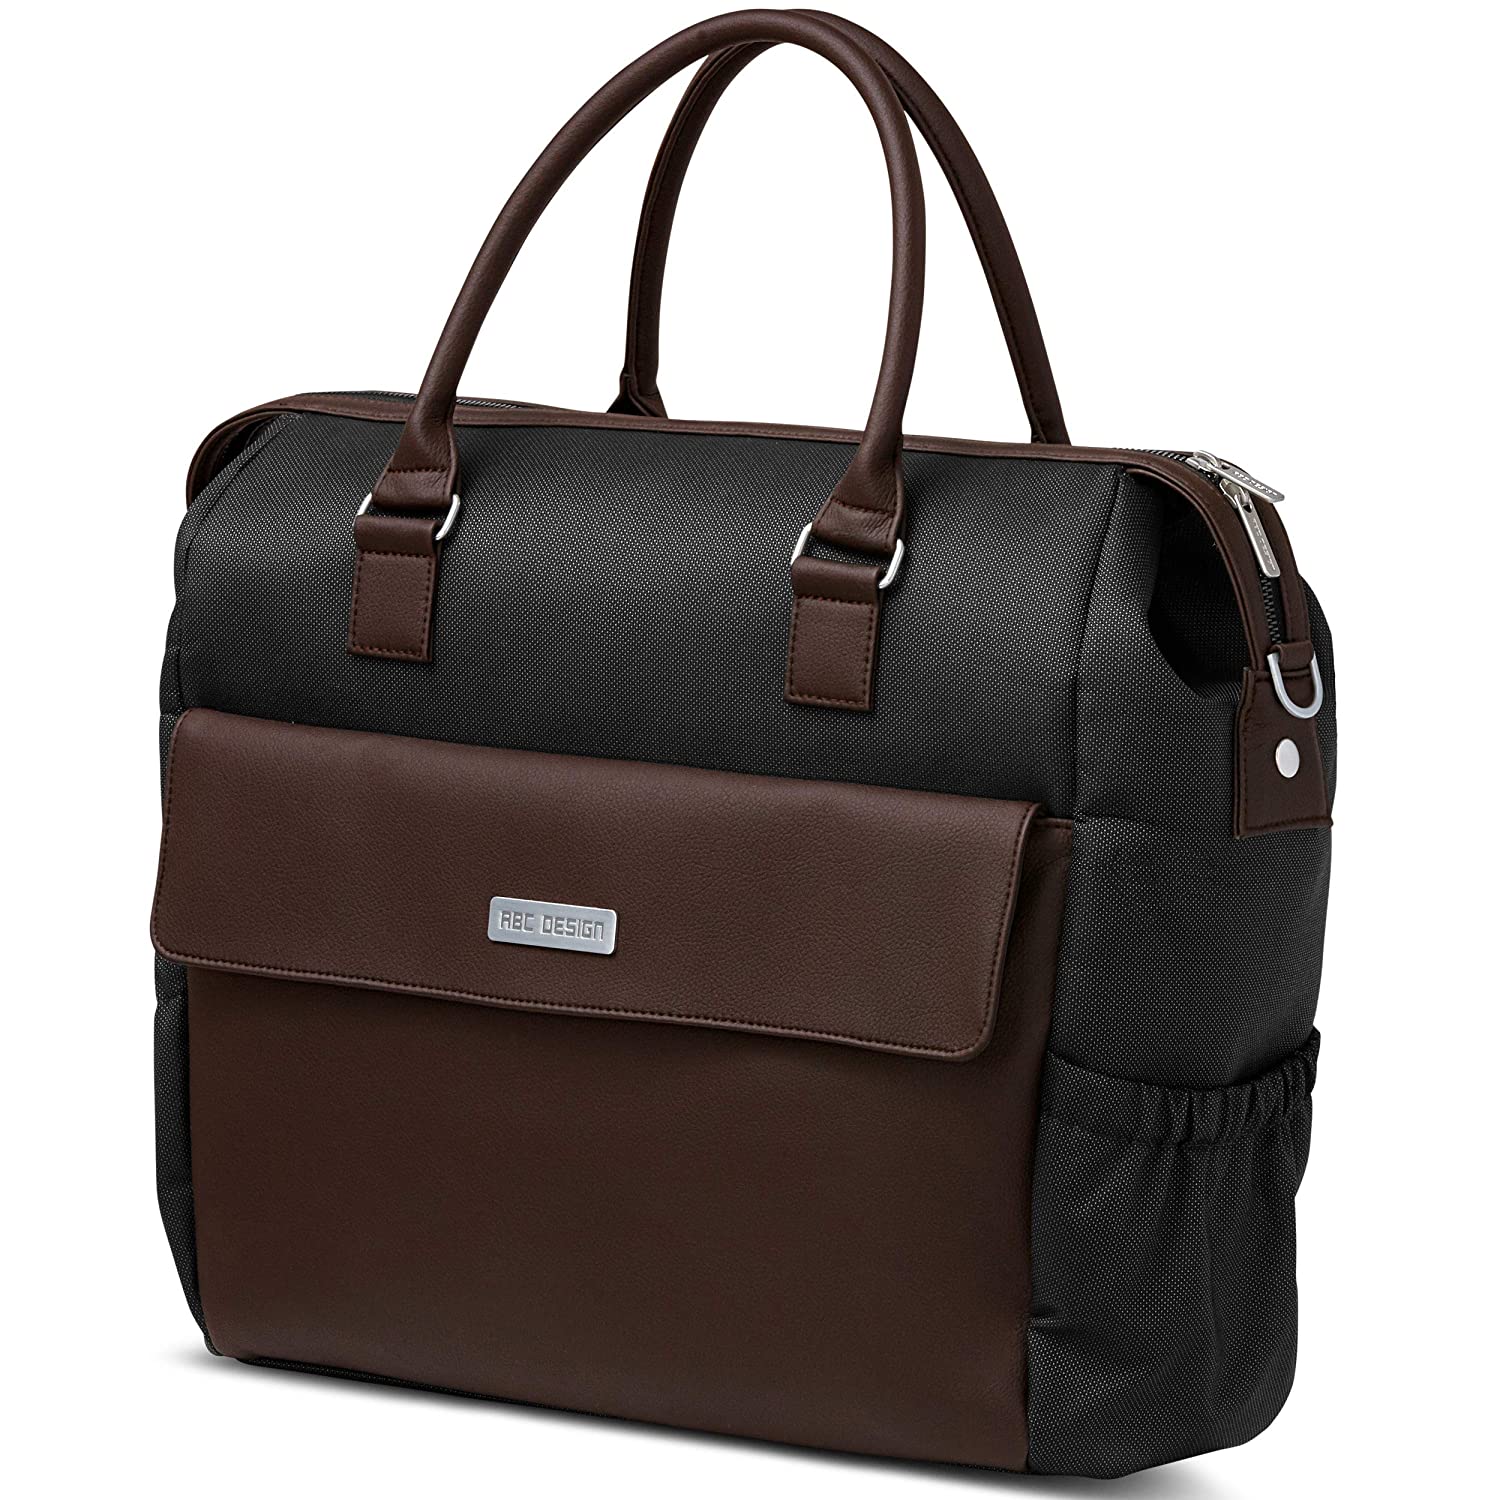 ABC Design Changing Bag Jetset - Including Changing Mat and Many Accessories - Gravel